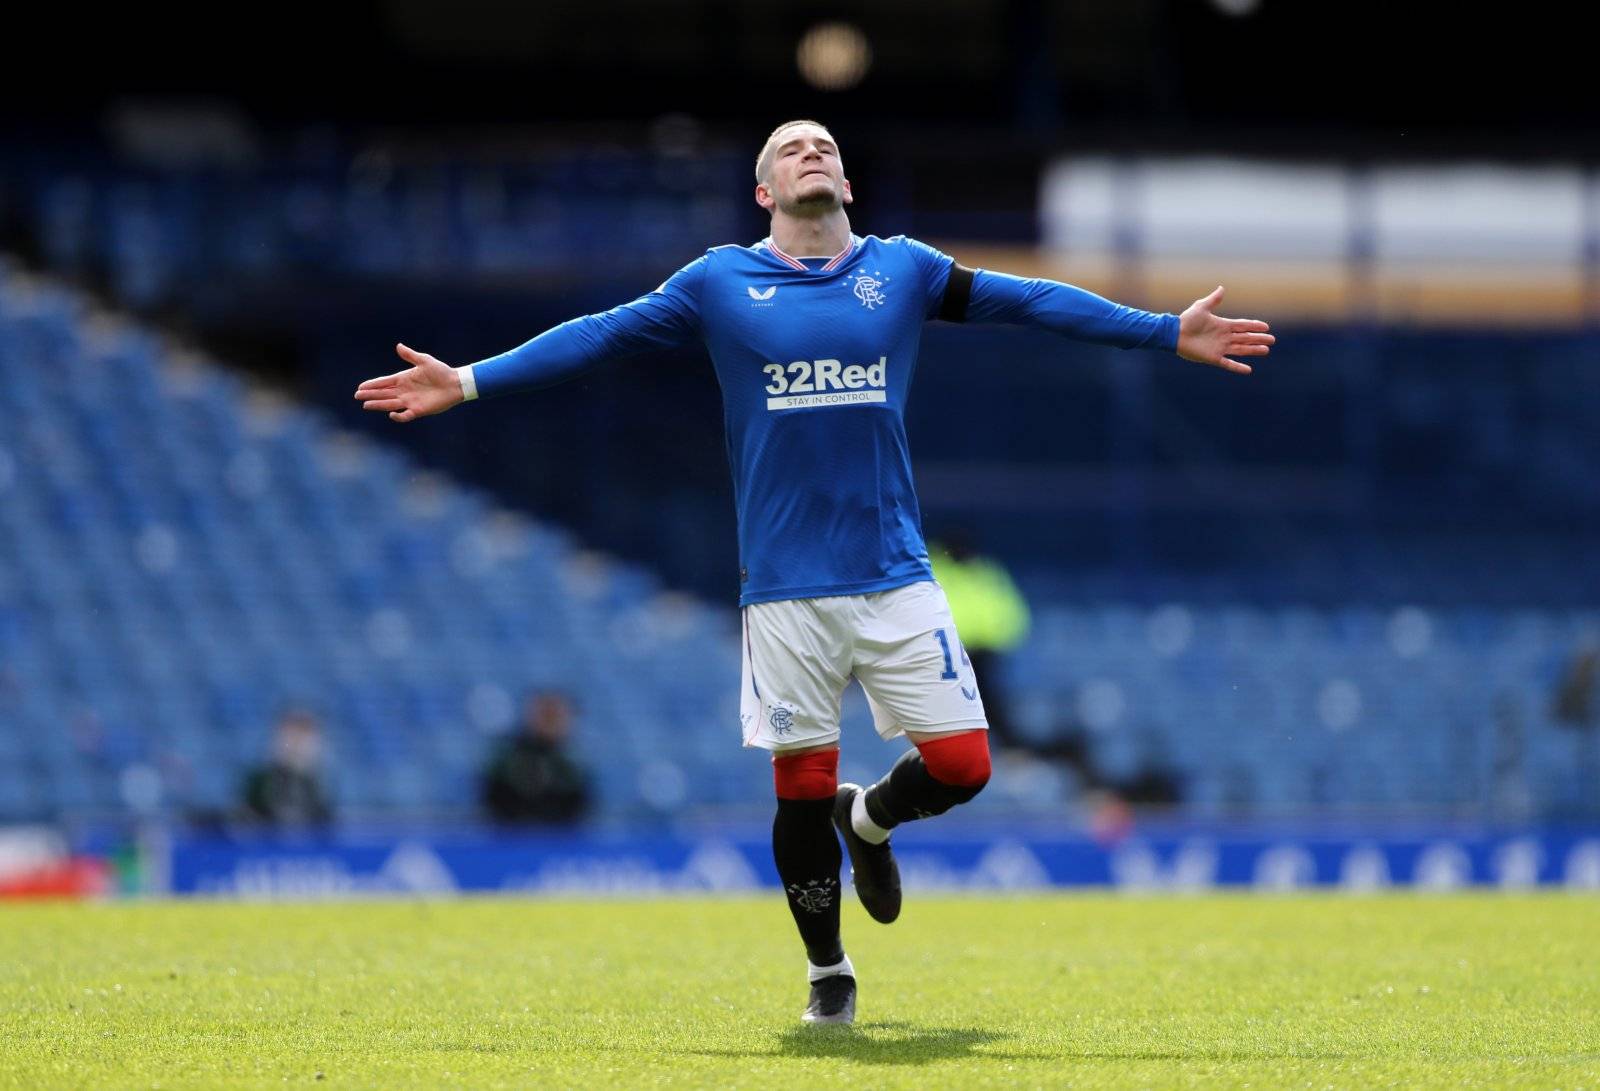 Rangers: Burnley would be a step down for Ryan Kent - Podcasts